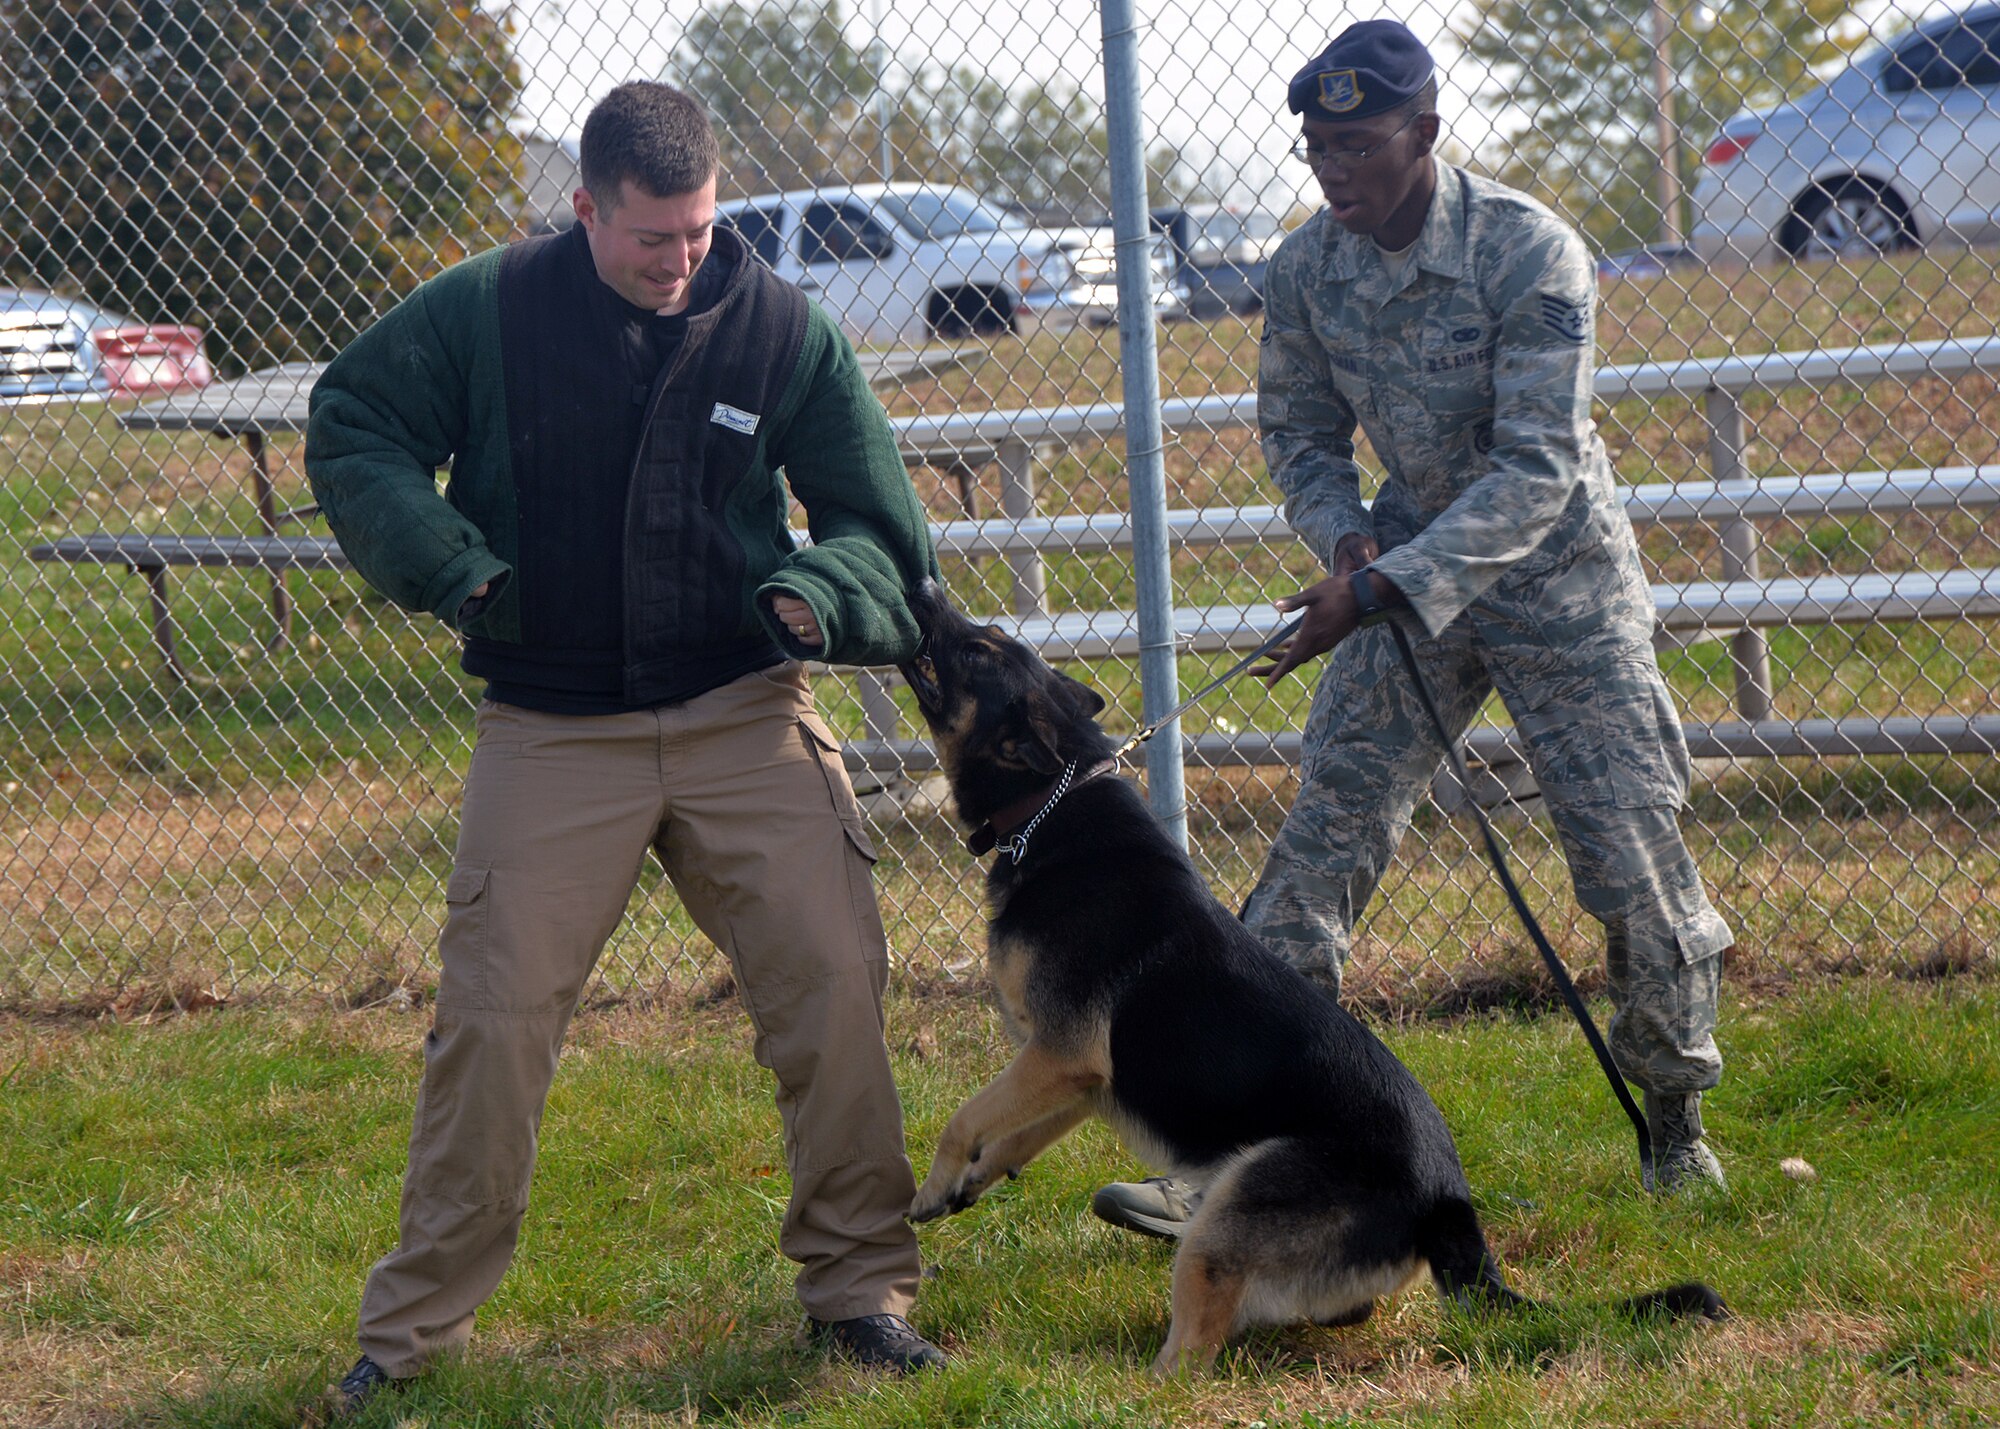 Military Working Dog Rocky bites simulated assailant, Senior Airman David Bafaro, 55th Security Forces Squadron MWD handler, as Staff Sgt. Elbert Foreman, 55th SFS MWD handler holds his leash, Oct. 21 at the 55th SFS MWD training facility. MWD Rocky is a fully certified, trained and validated explosive detector dog valued at nearly $25,000. (U.S. Air Force photo by Kendra Williams/Released)